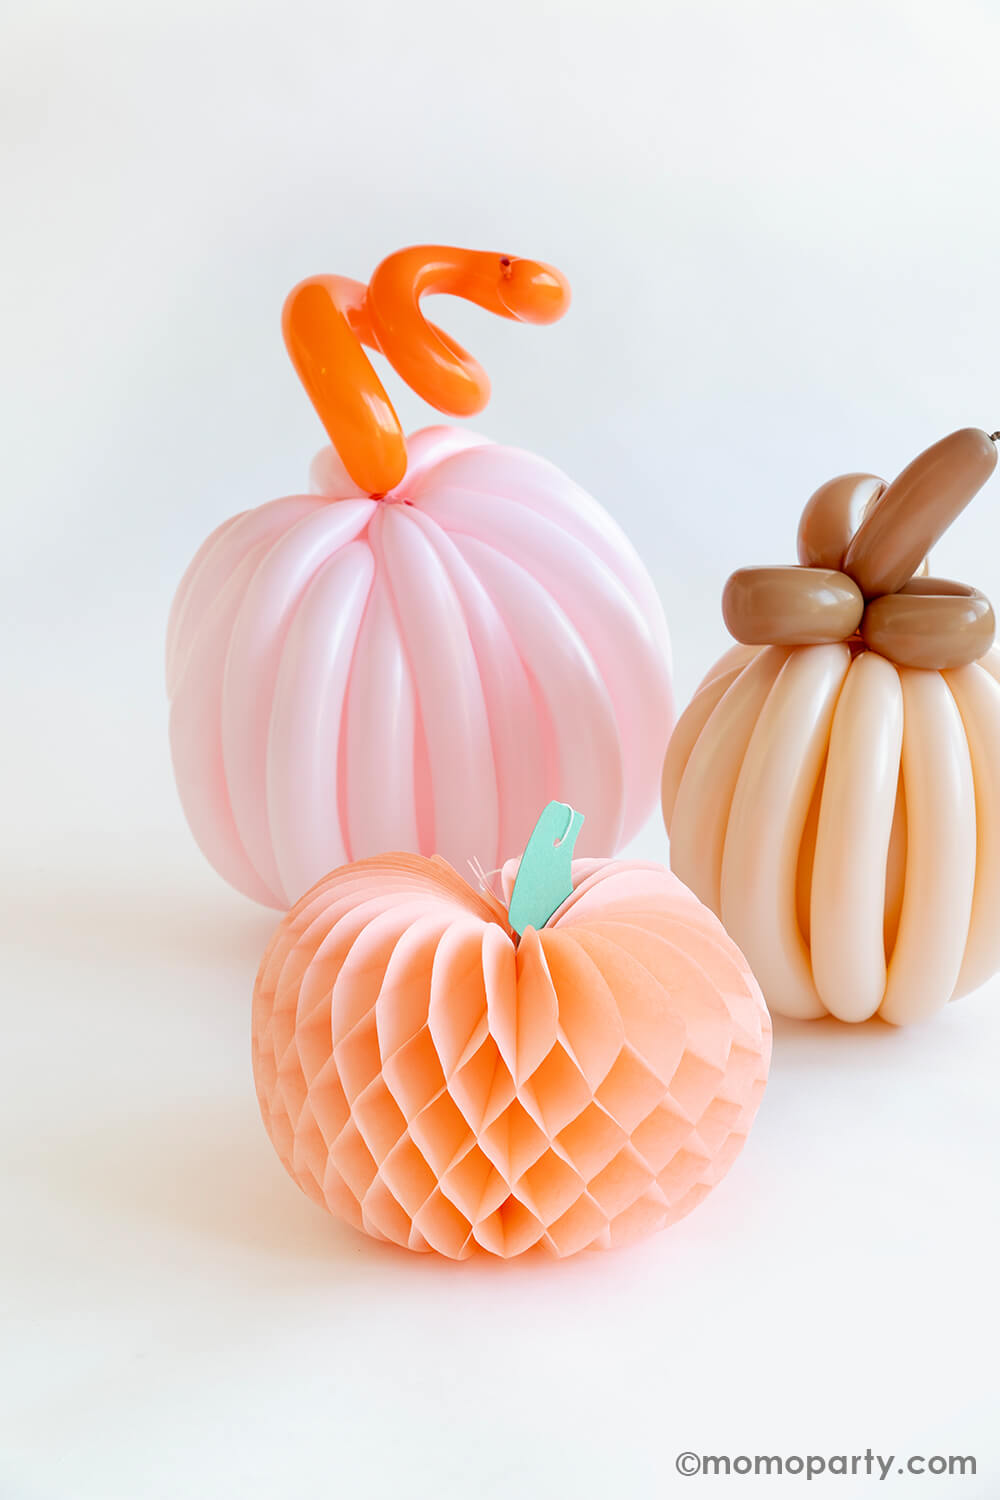 Two boho themed colored pumpkins made with twisting balloons, next to them is Momo Party's peach honeycomb decoration. All together they make a perfect fall decoration for an autumn gathering or Halloween bash.